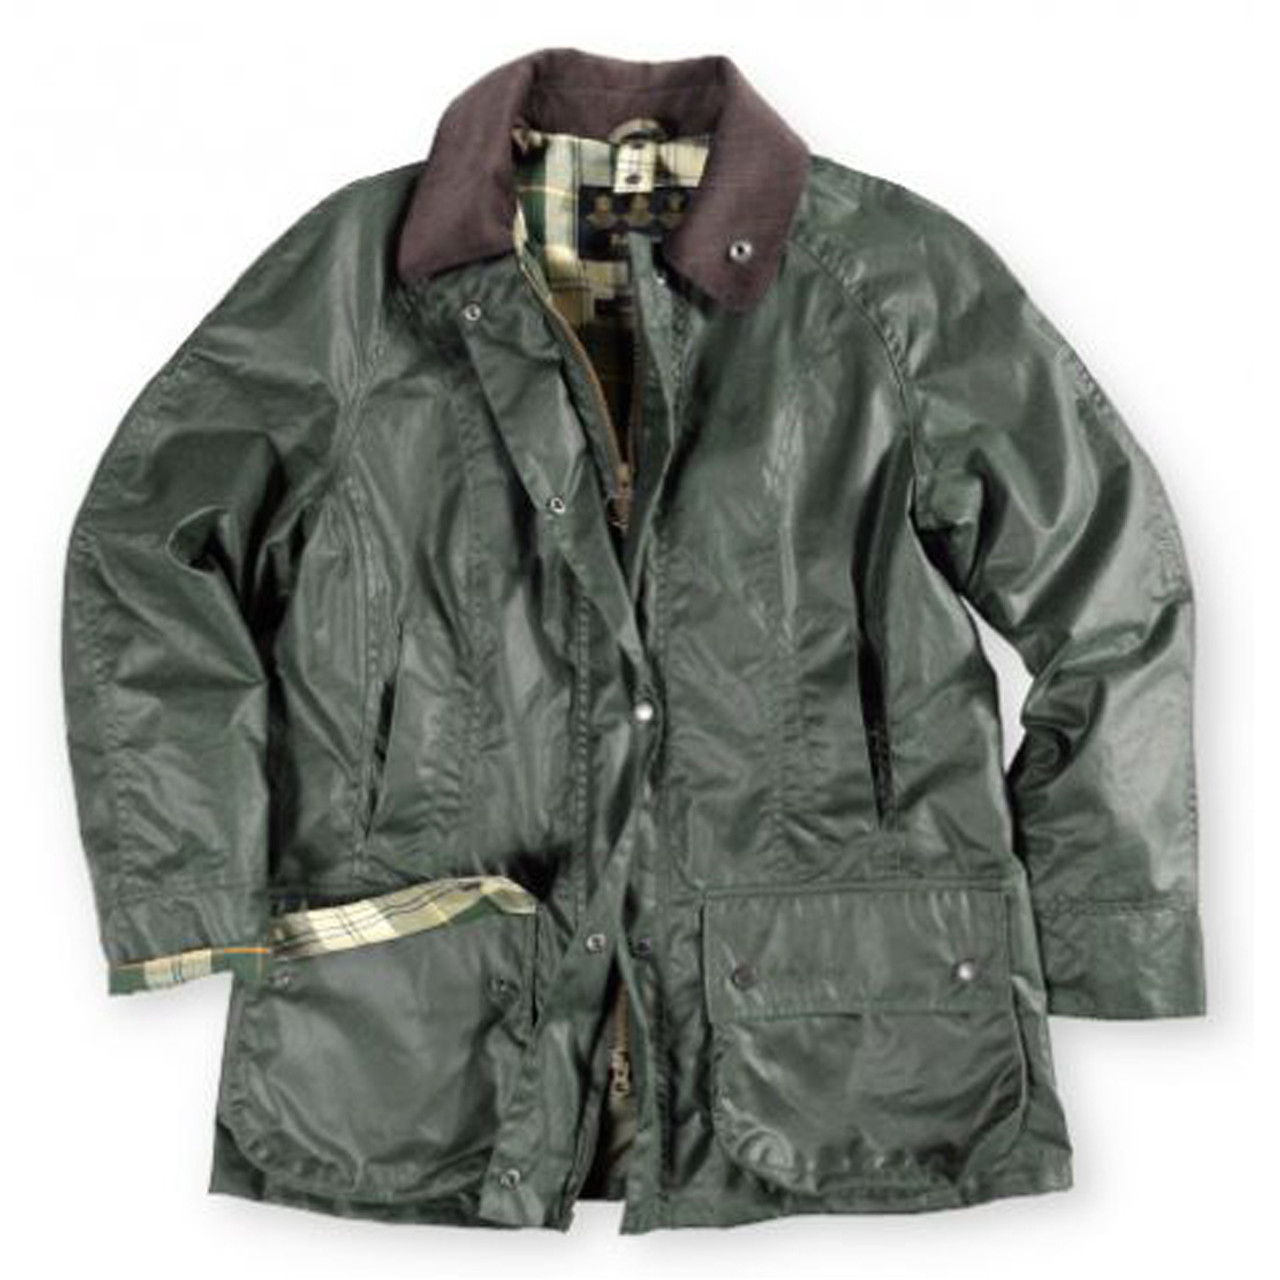 Barbour Women's Beadnell Waxed Cotton Jacket - Sage.